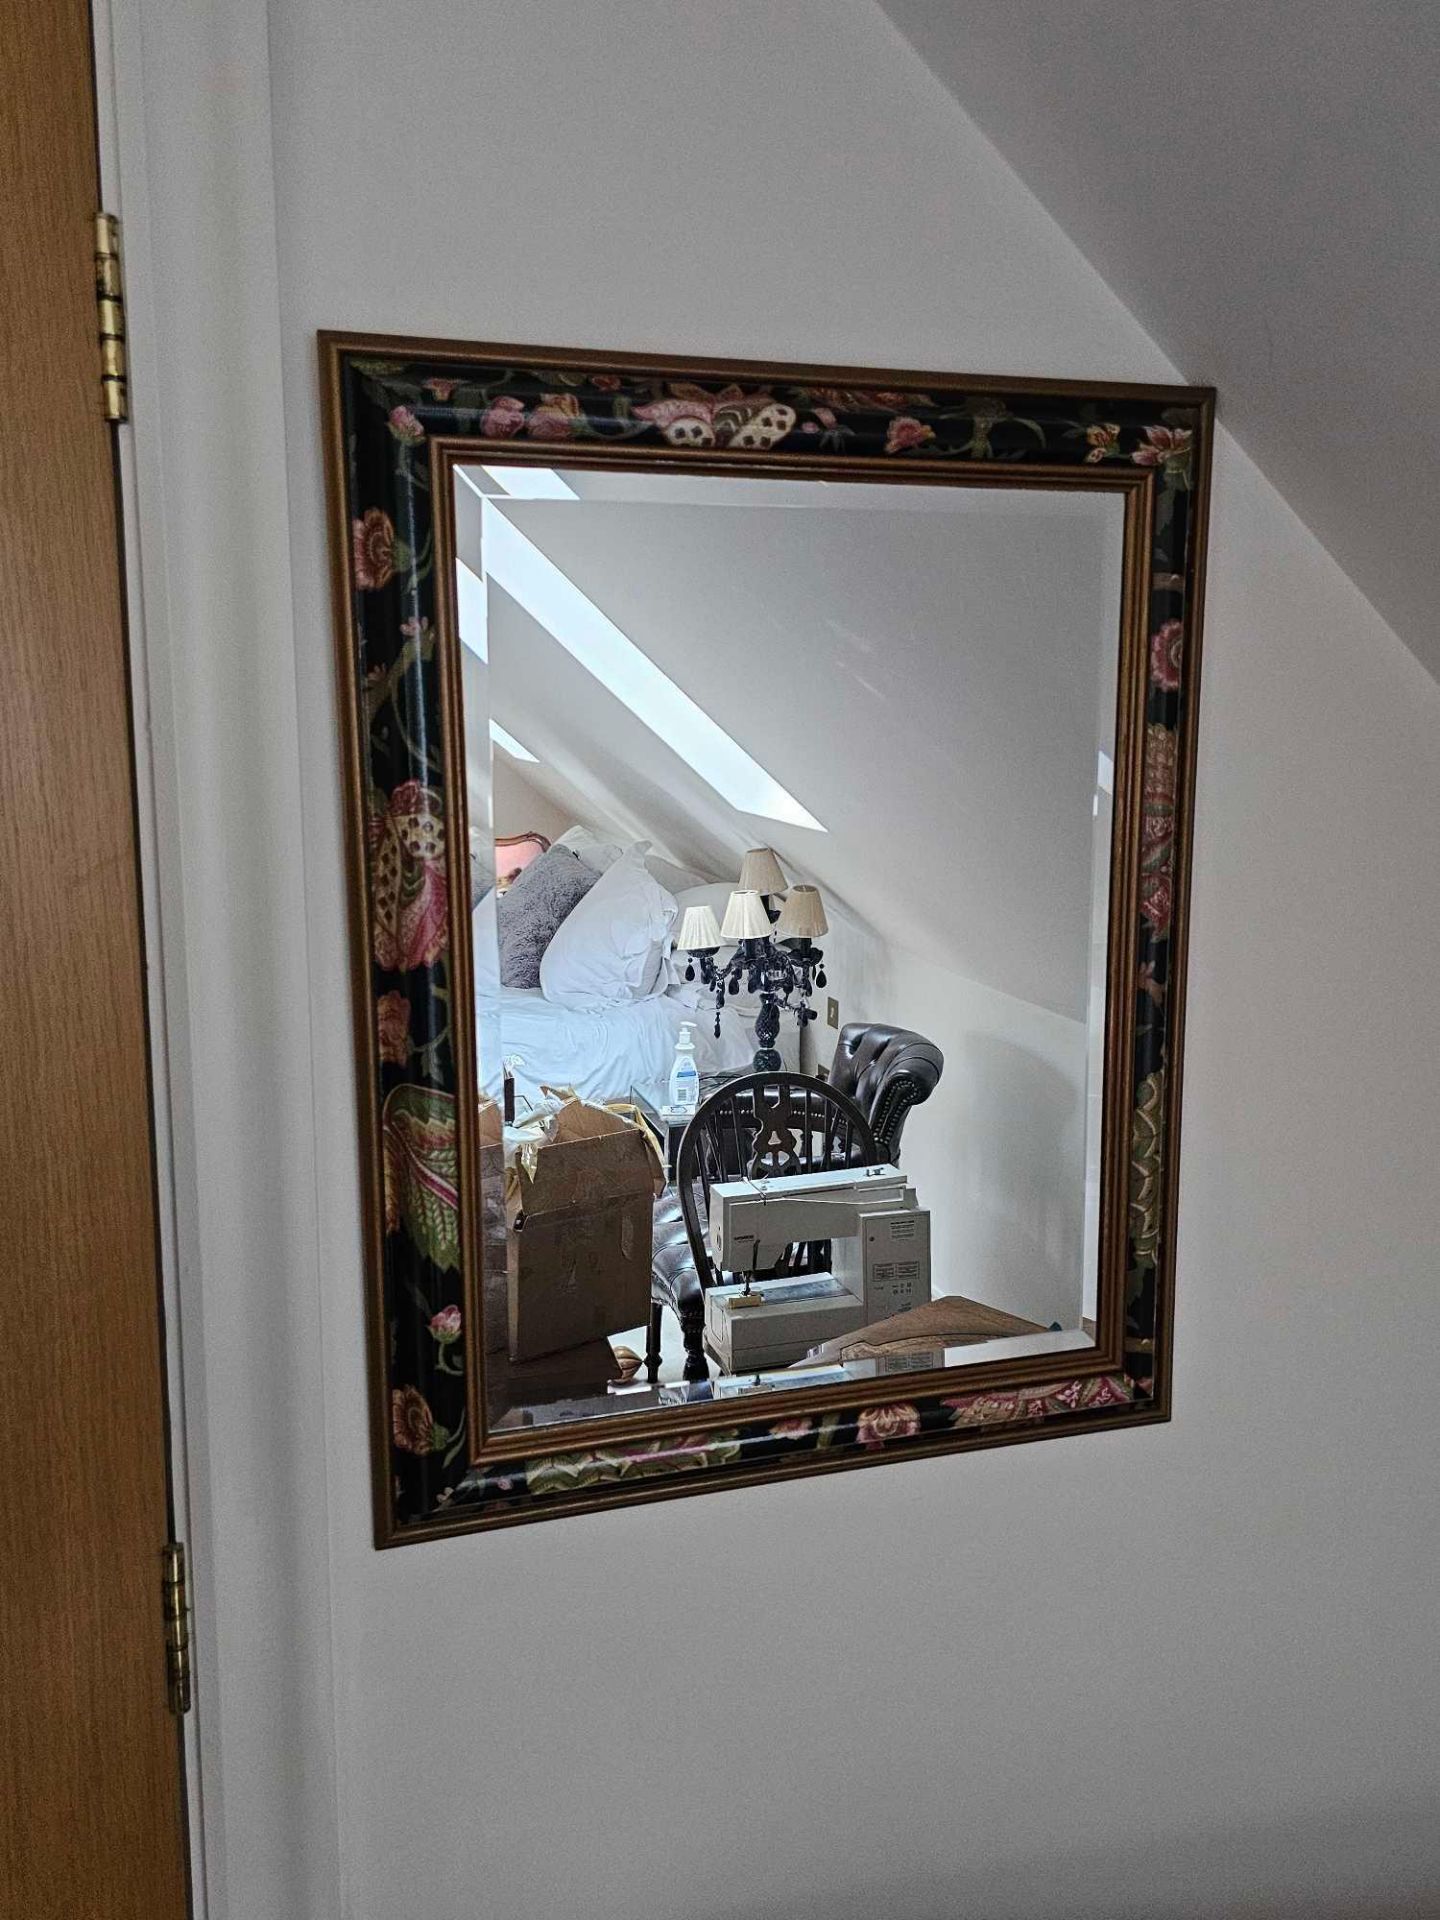 A Japanned Cushion Frame Bevelled Mirror 60 X 75cm - Image 3 of 3